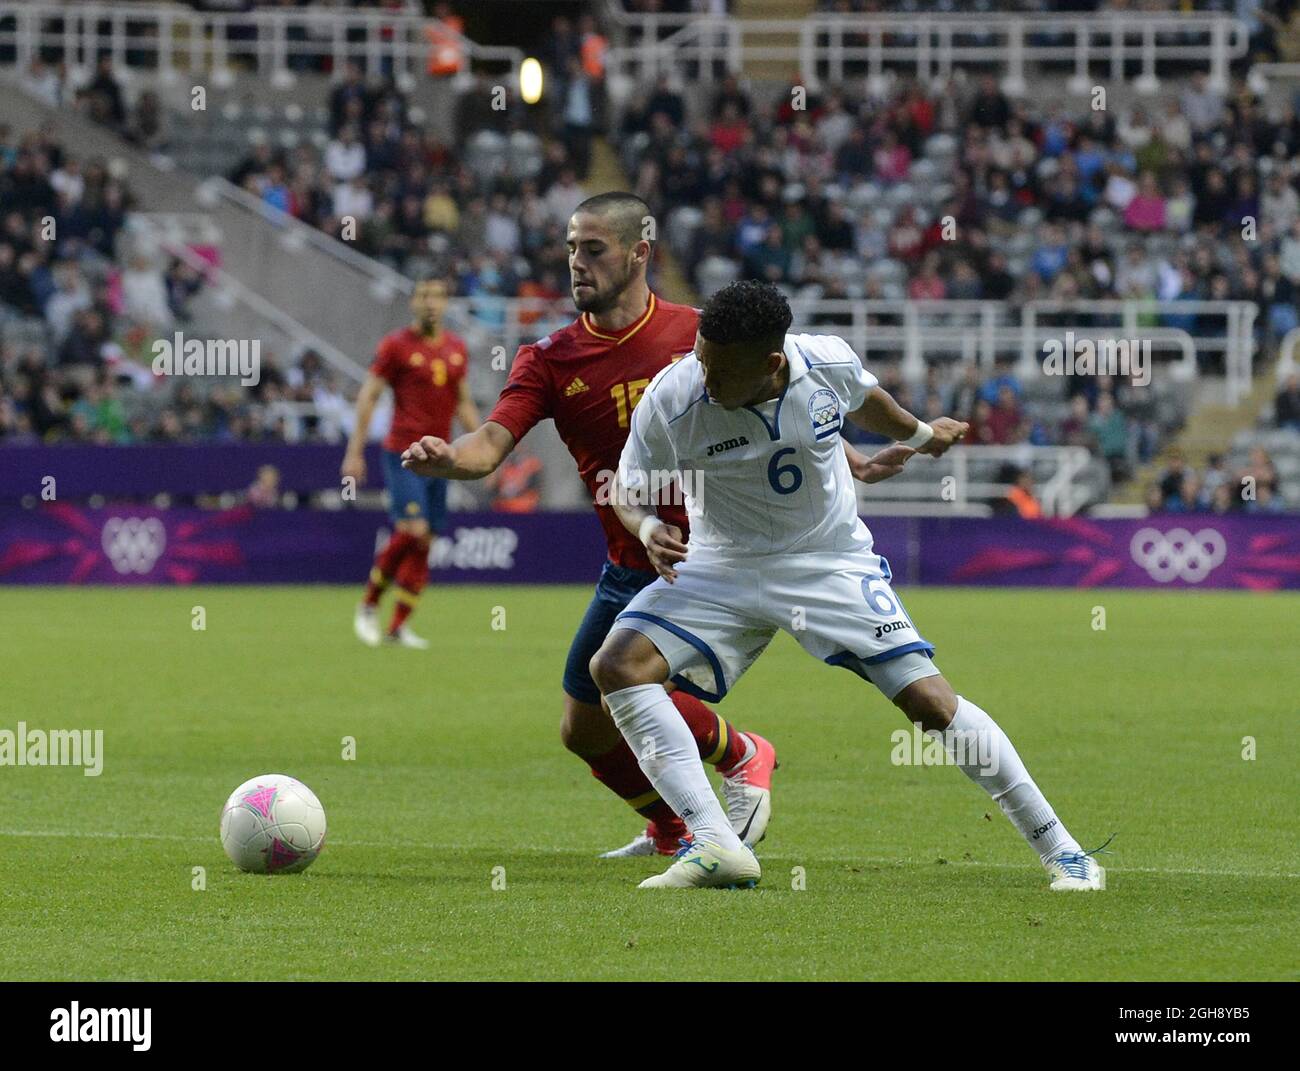 Spain's Isco (L) and Honduras' Arnold Peralta jostle for the ball during the London Olympic 2012 first round Group D men's match between Spain v Honduras at the St. James' Park, Newcastle upon Tyne on the 29th July 2012. Stock Photo